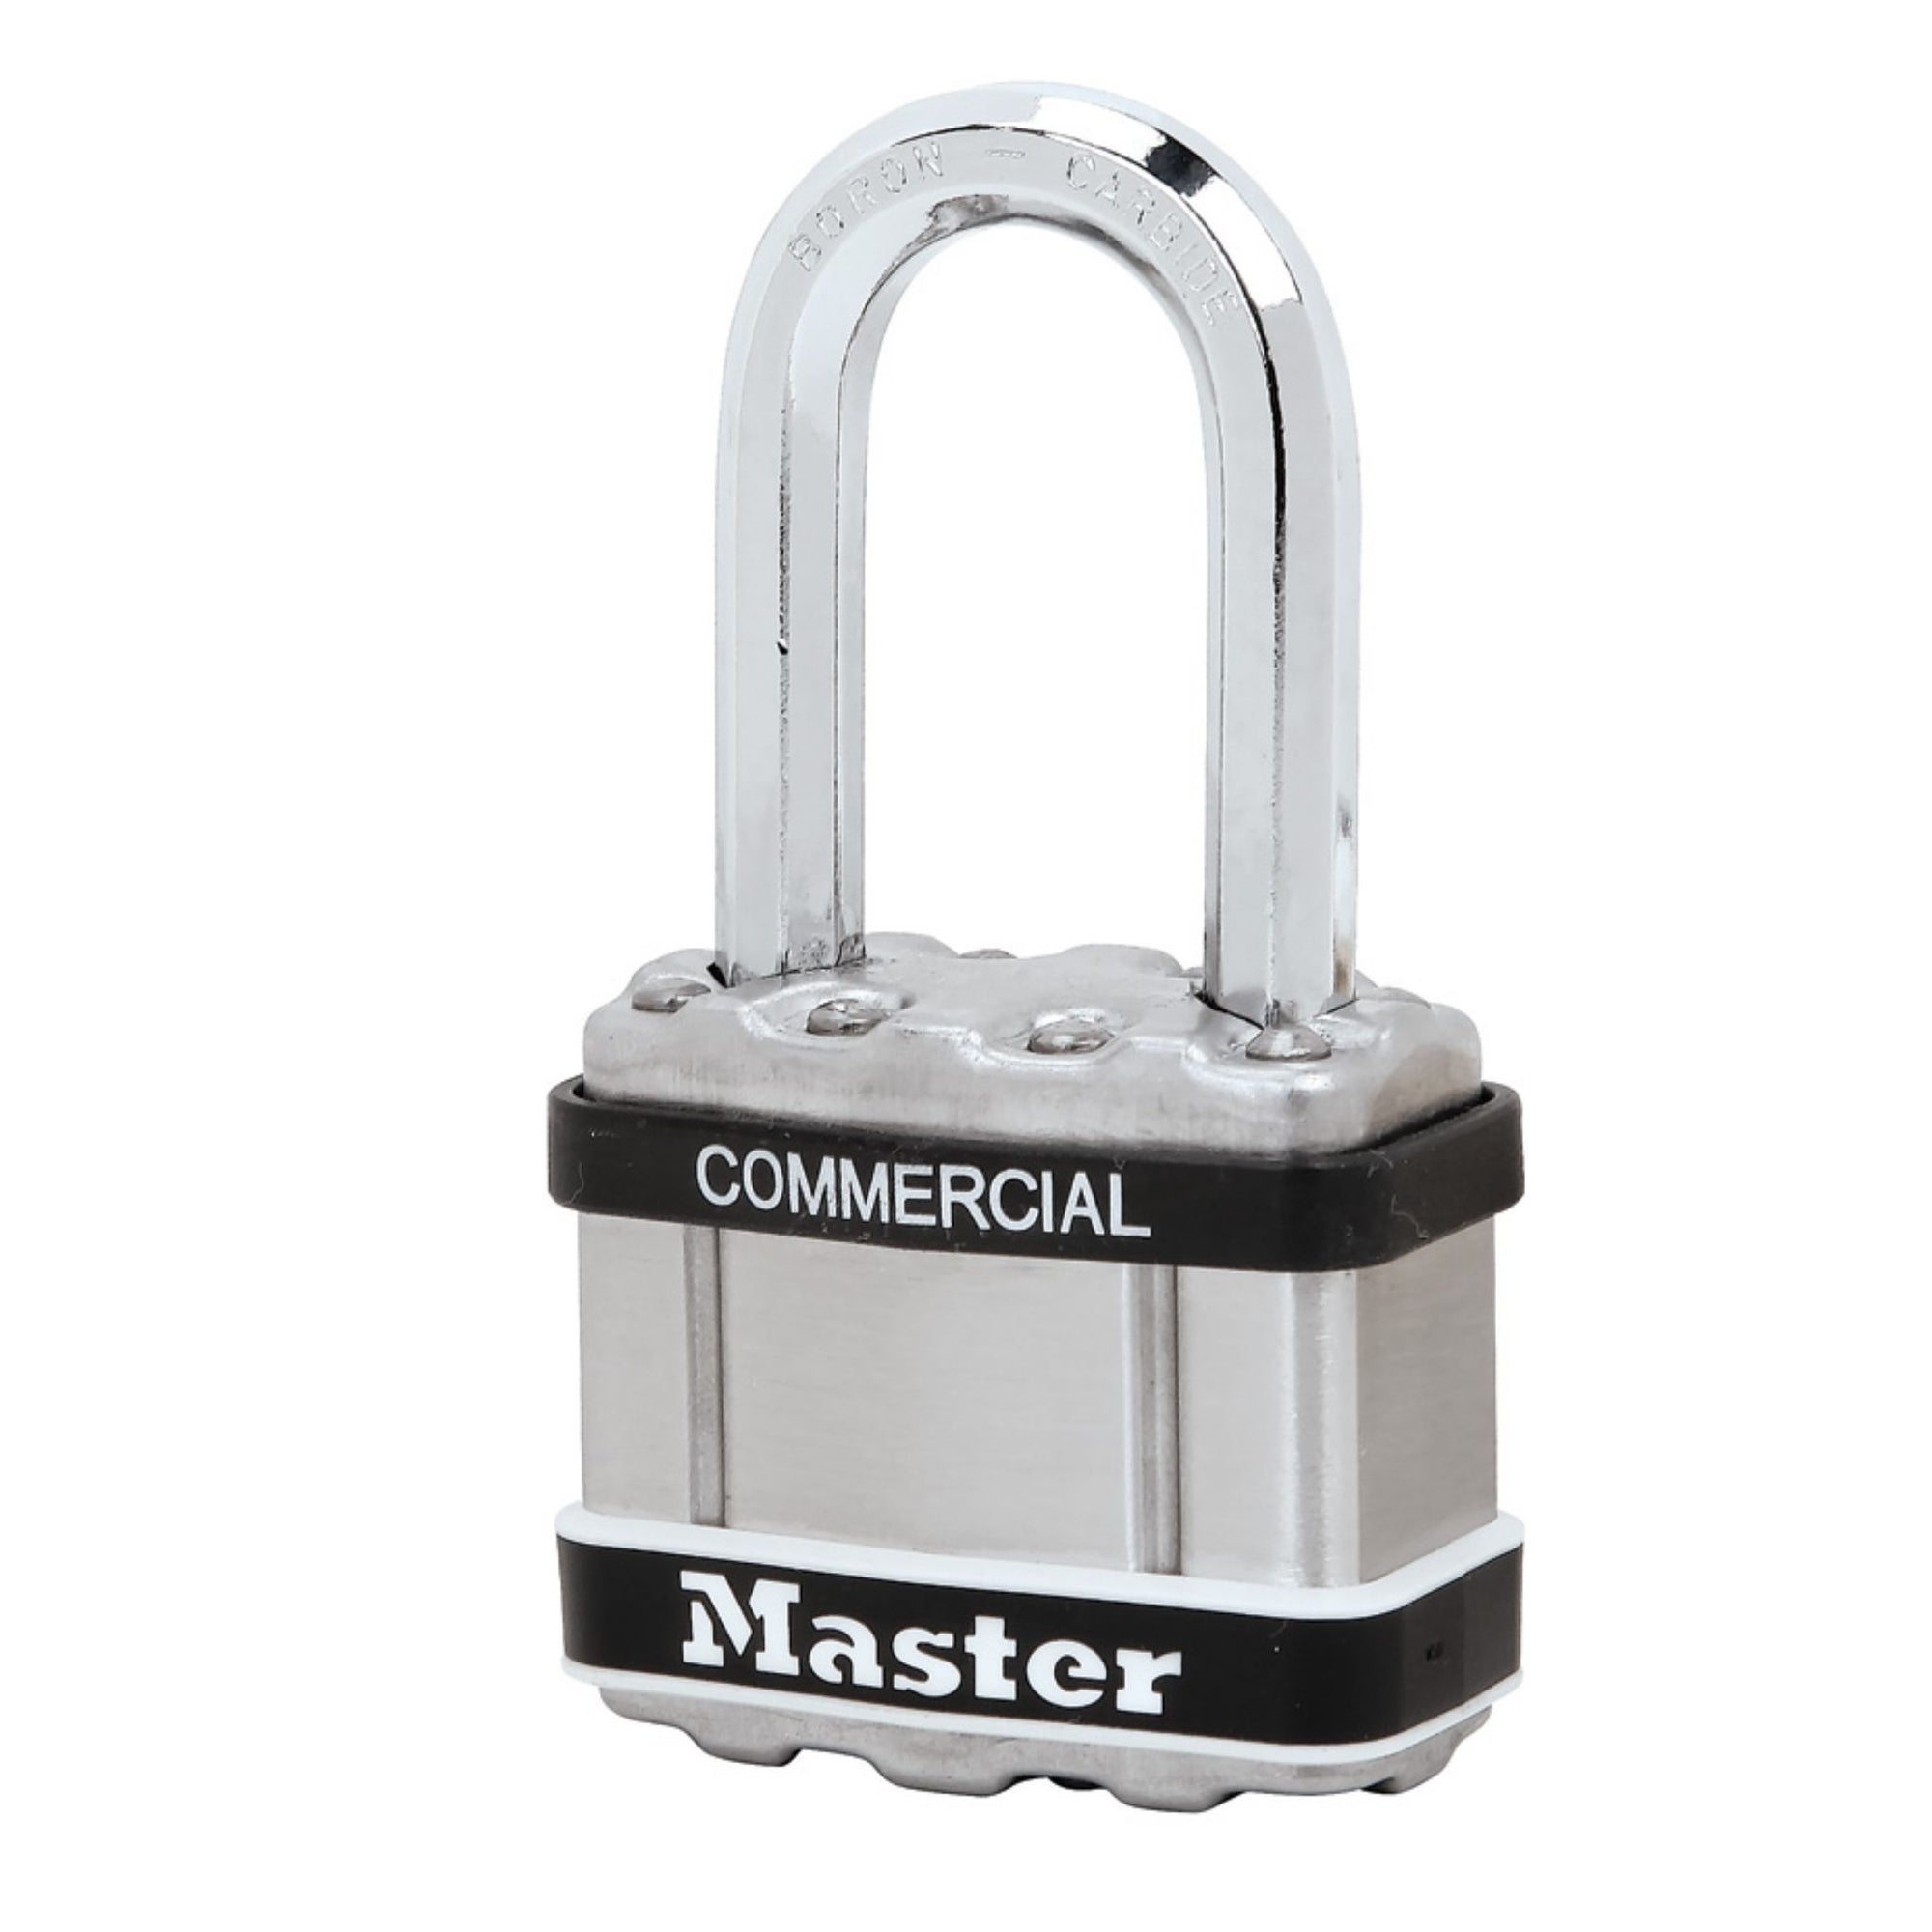 Master Lock M1 STS KALF Commercial Magnum Padlock Keyed Alike with 1-1/2" Shackle - The Lock Source